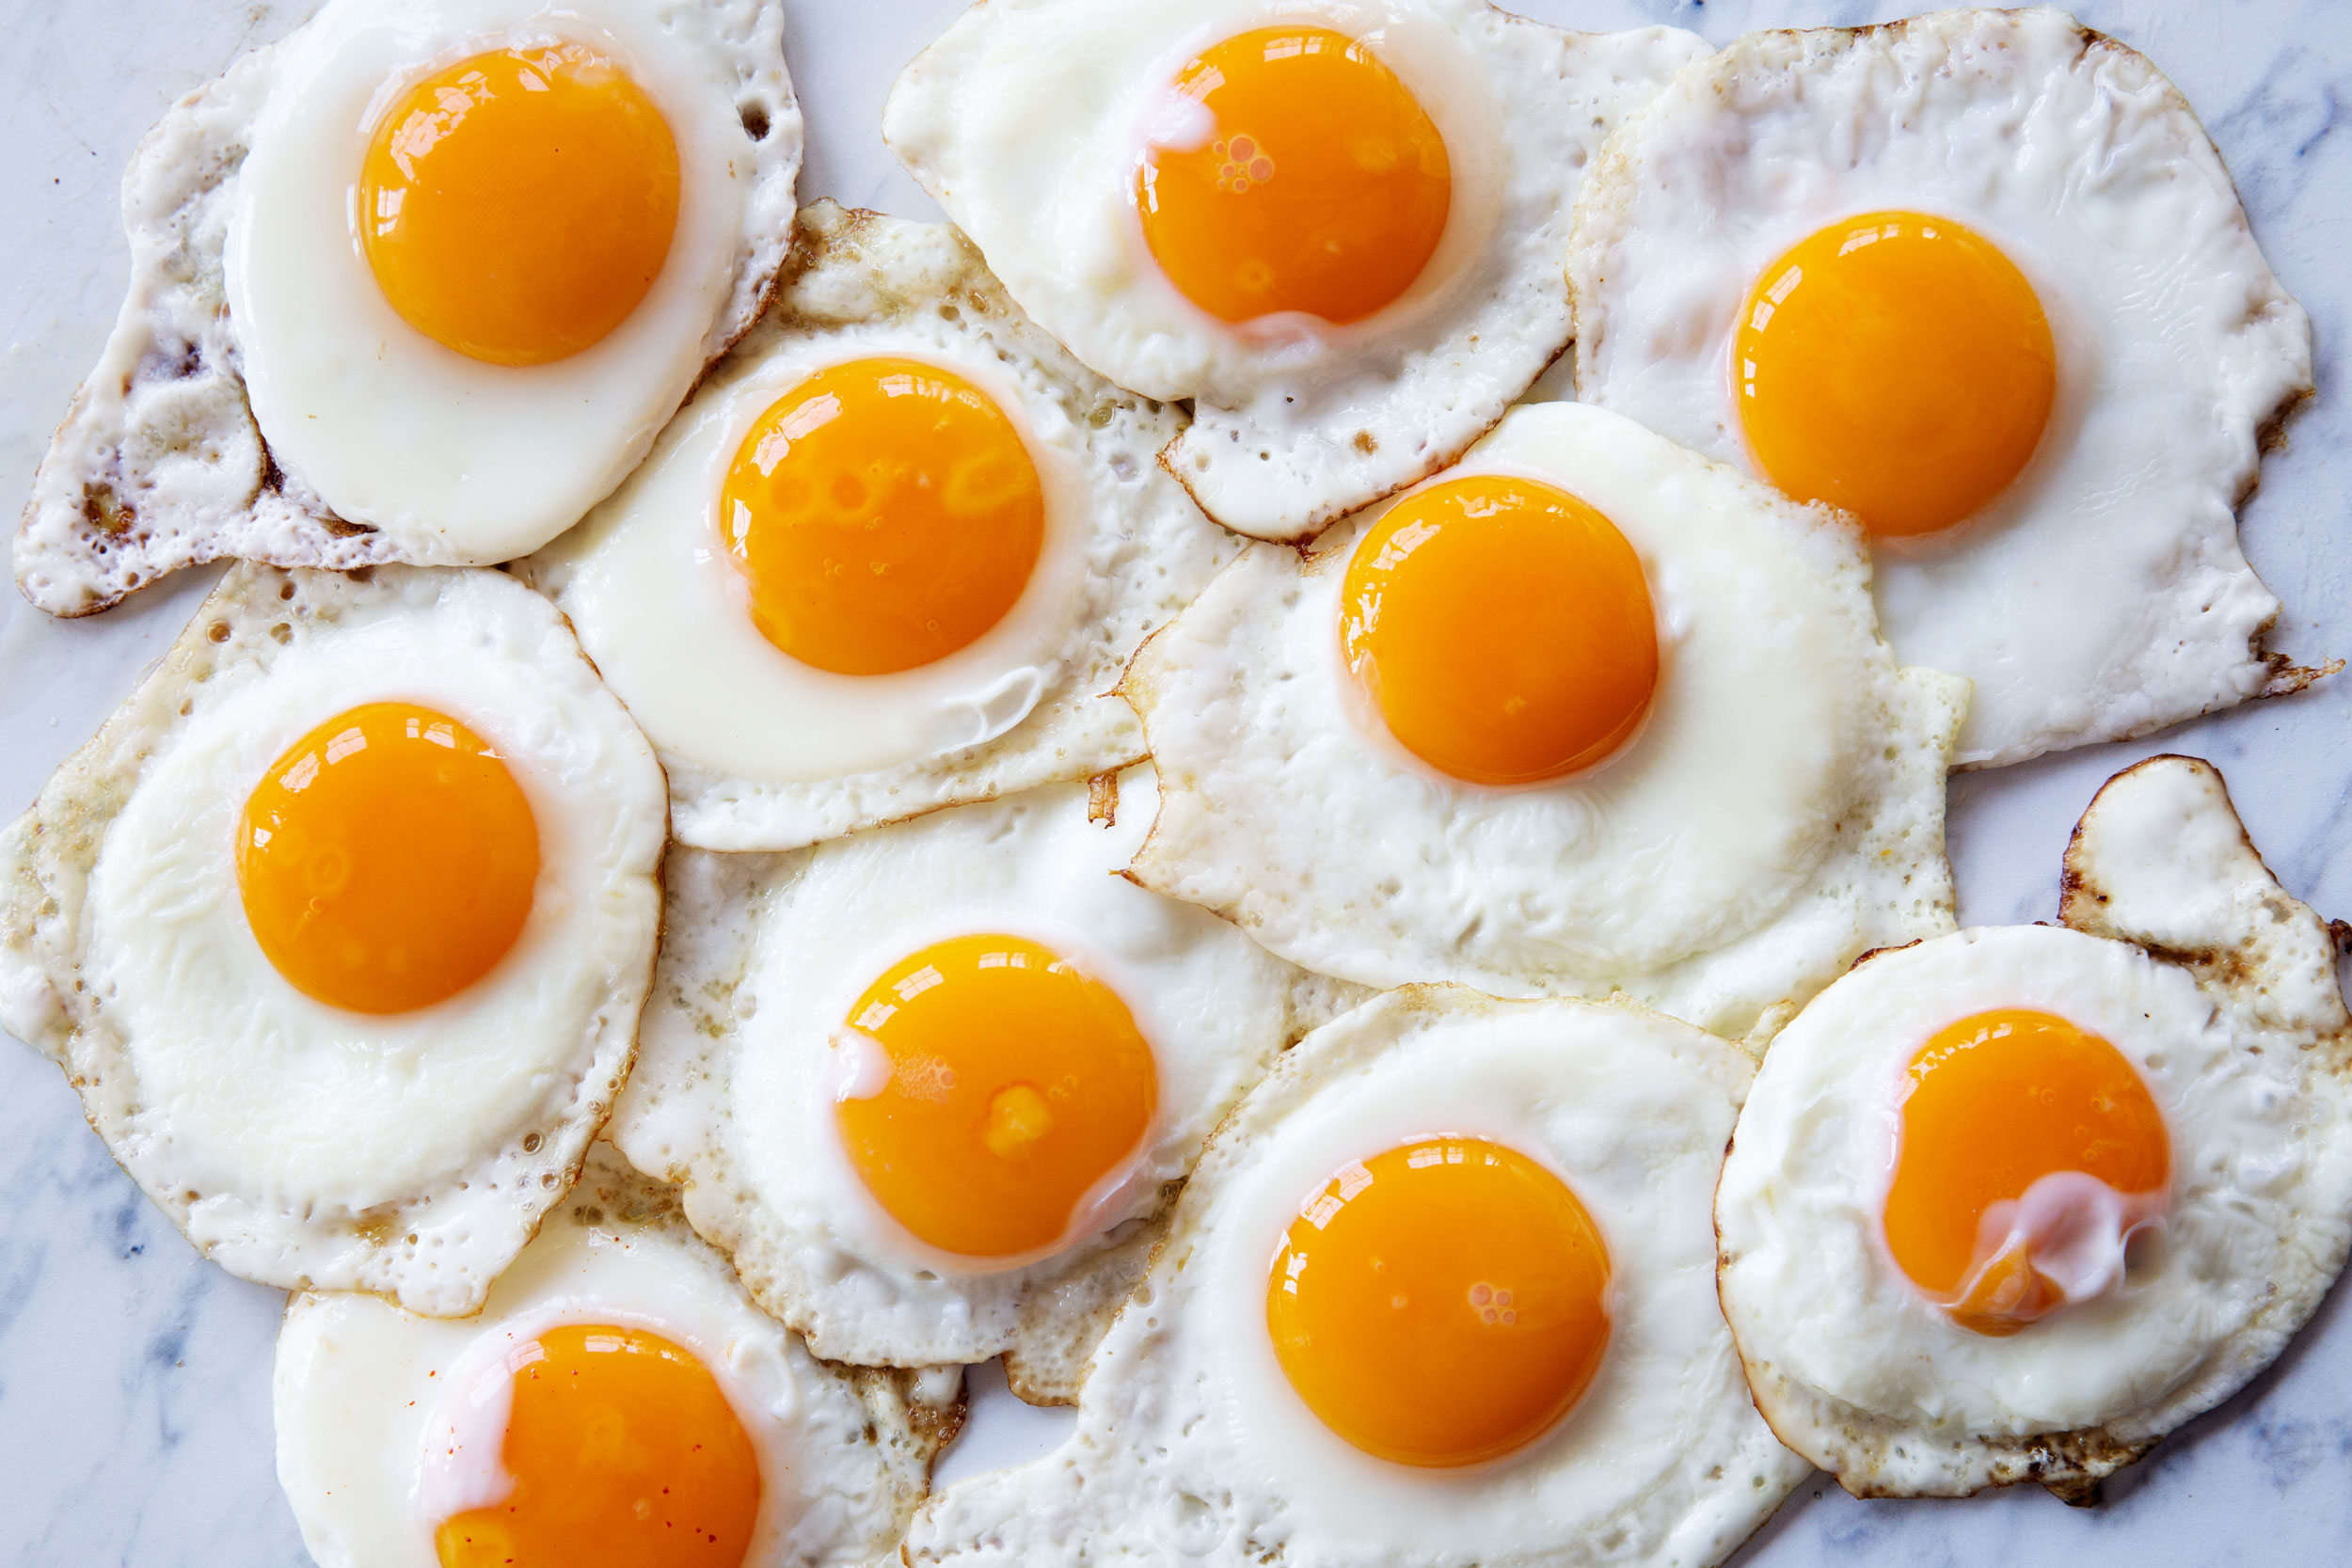 Eggs Q&A: What's the difference between free run and free range